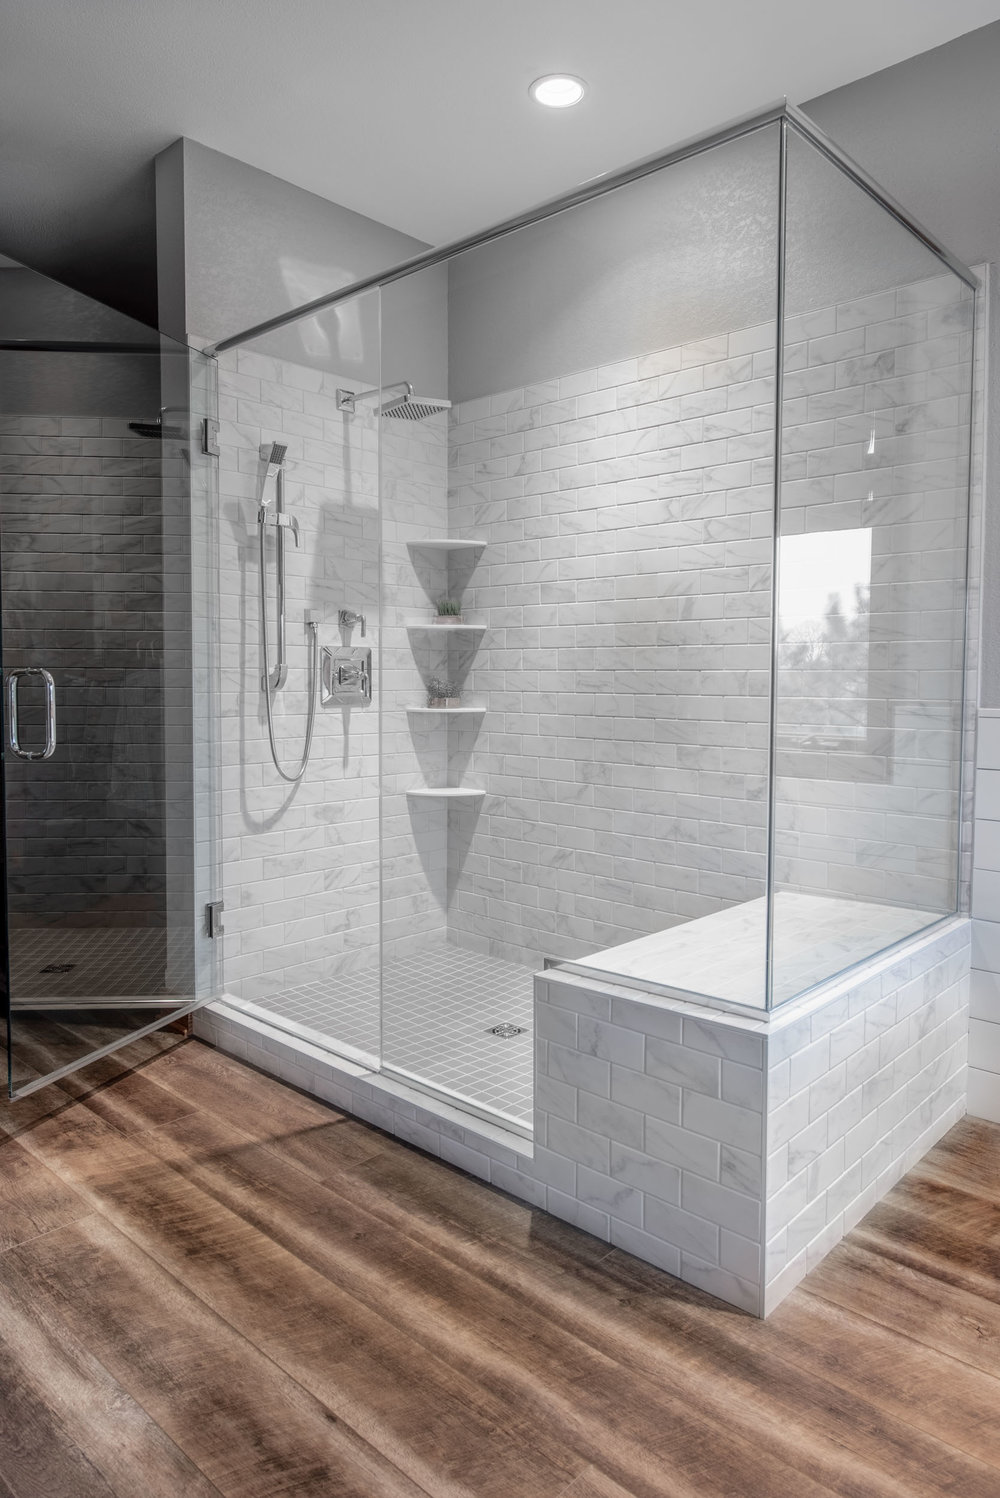 How To Choose Shower Tile When, How To Redo A Bathroom Shower With Tile